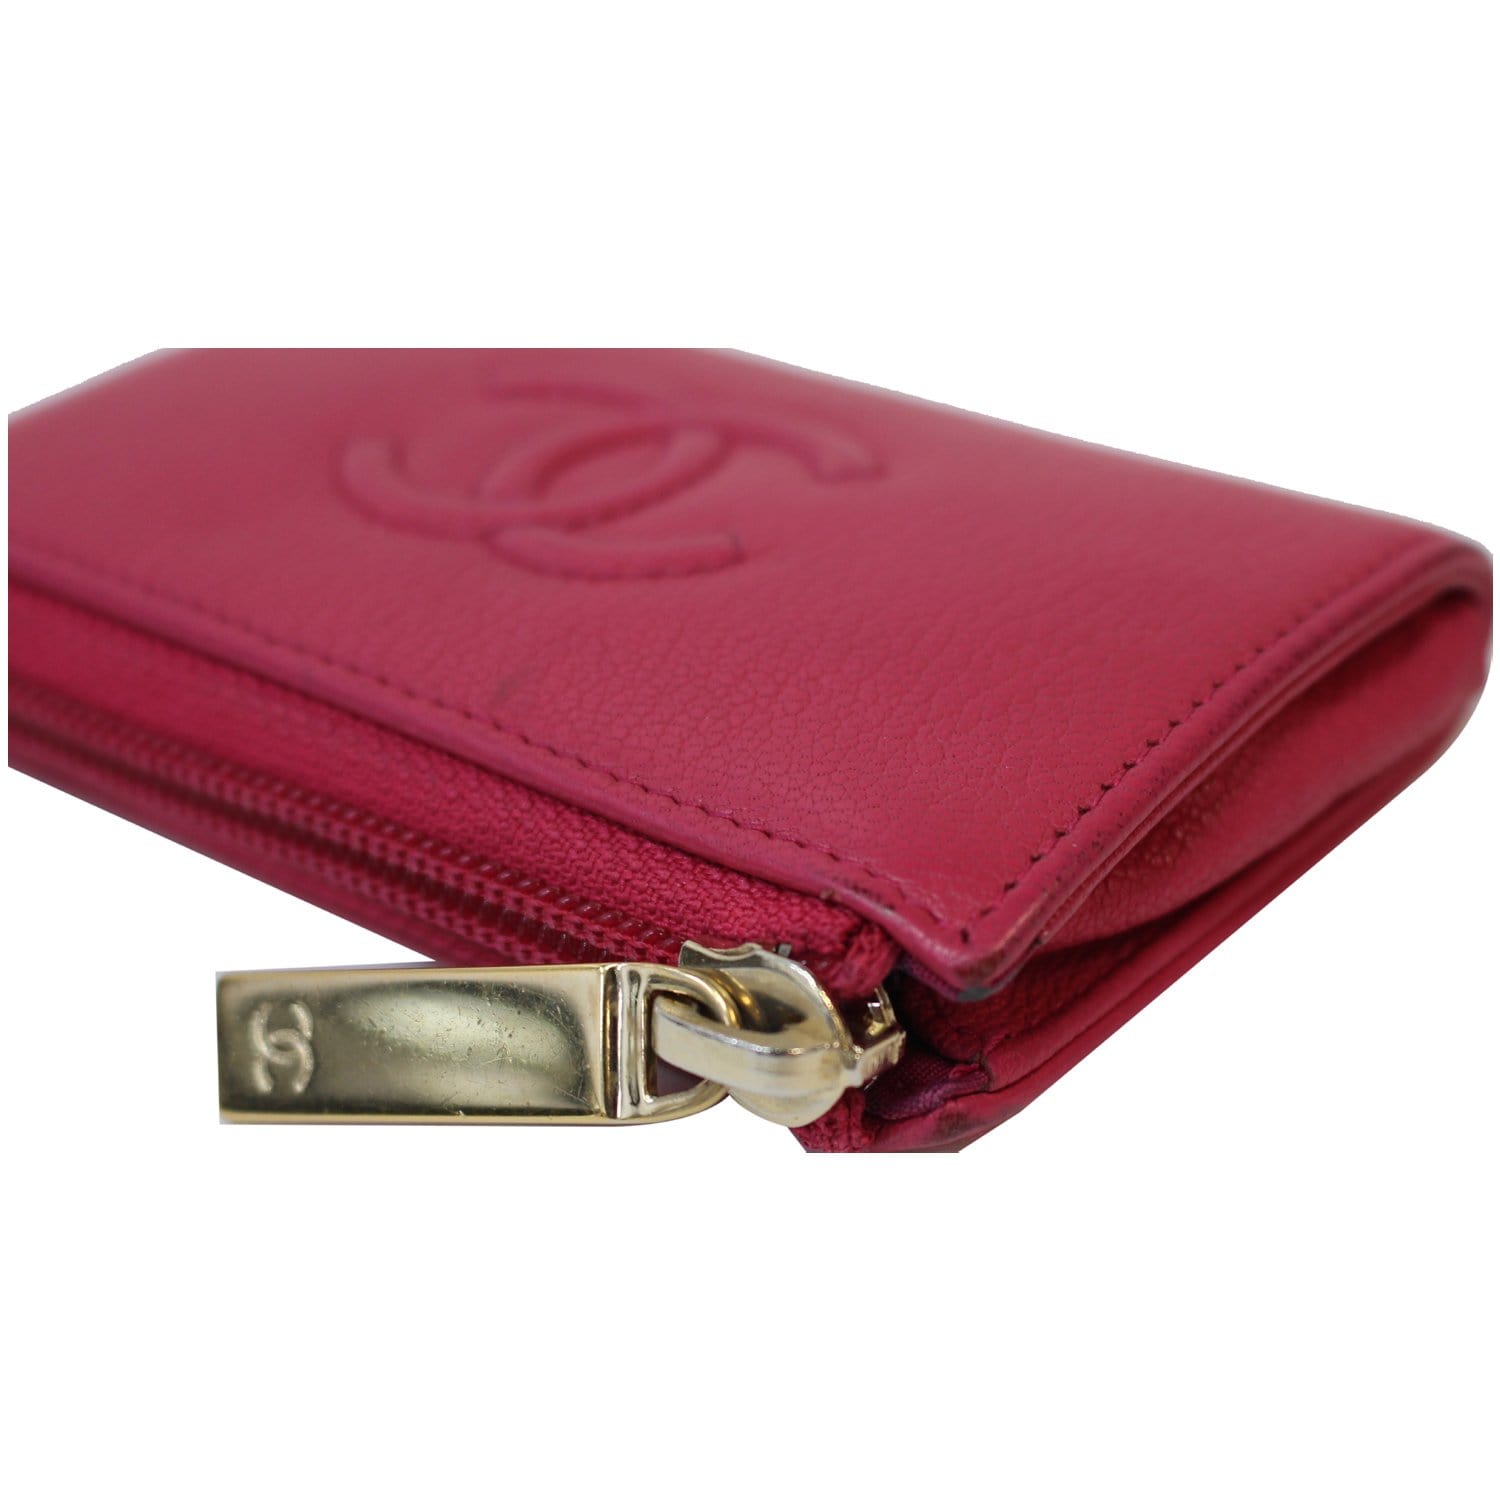 CHANEL 16S Red Lamb Skin Key Chain Zip Card Holder Silver Hardware –  AYAINLOVE CURATED LUXURIES